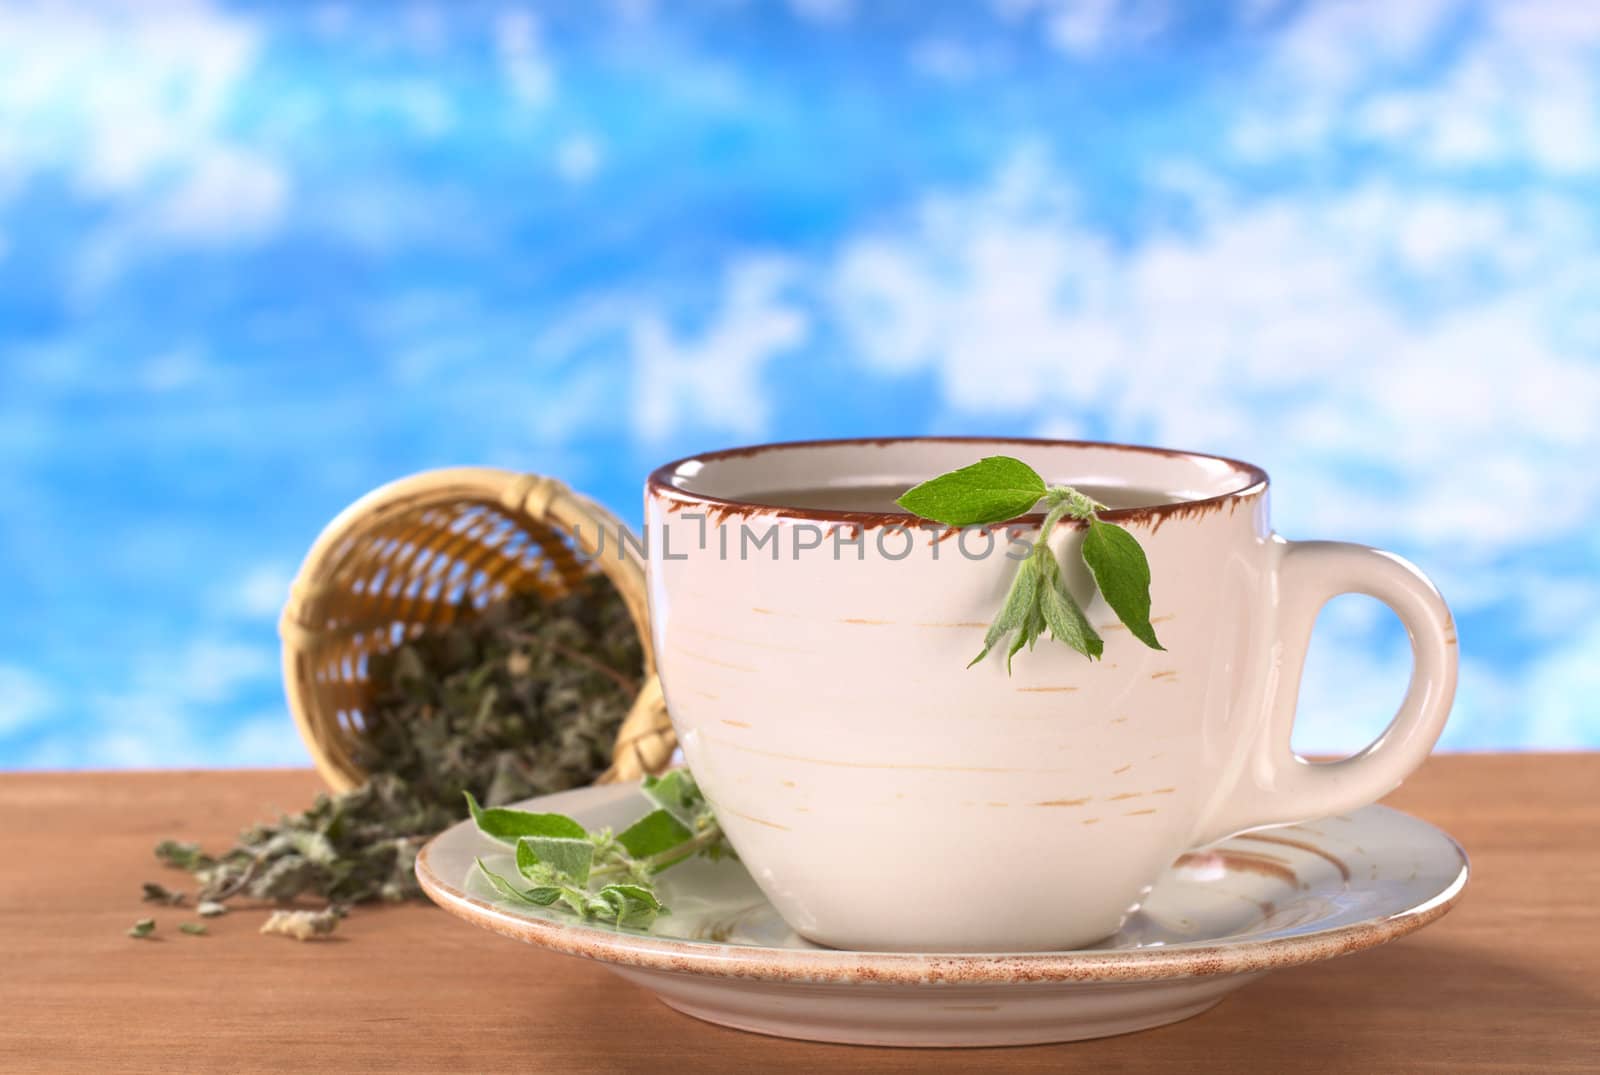 Herbal tea prepared from the Peruvian herb called Muna (lat. Minthostachys stetosa) which is used mainly for its positive digestive effects and has a mint-like taste (Selective Focus, Focus on the head of the fresh plant on the rim of the cup)